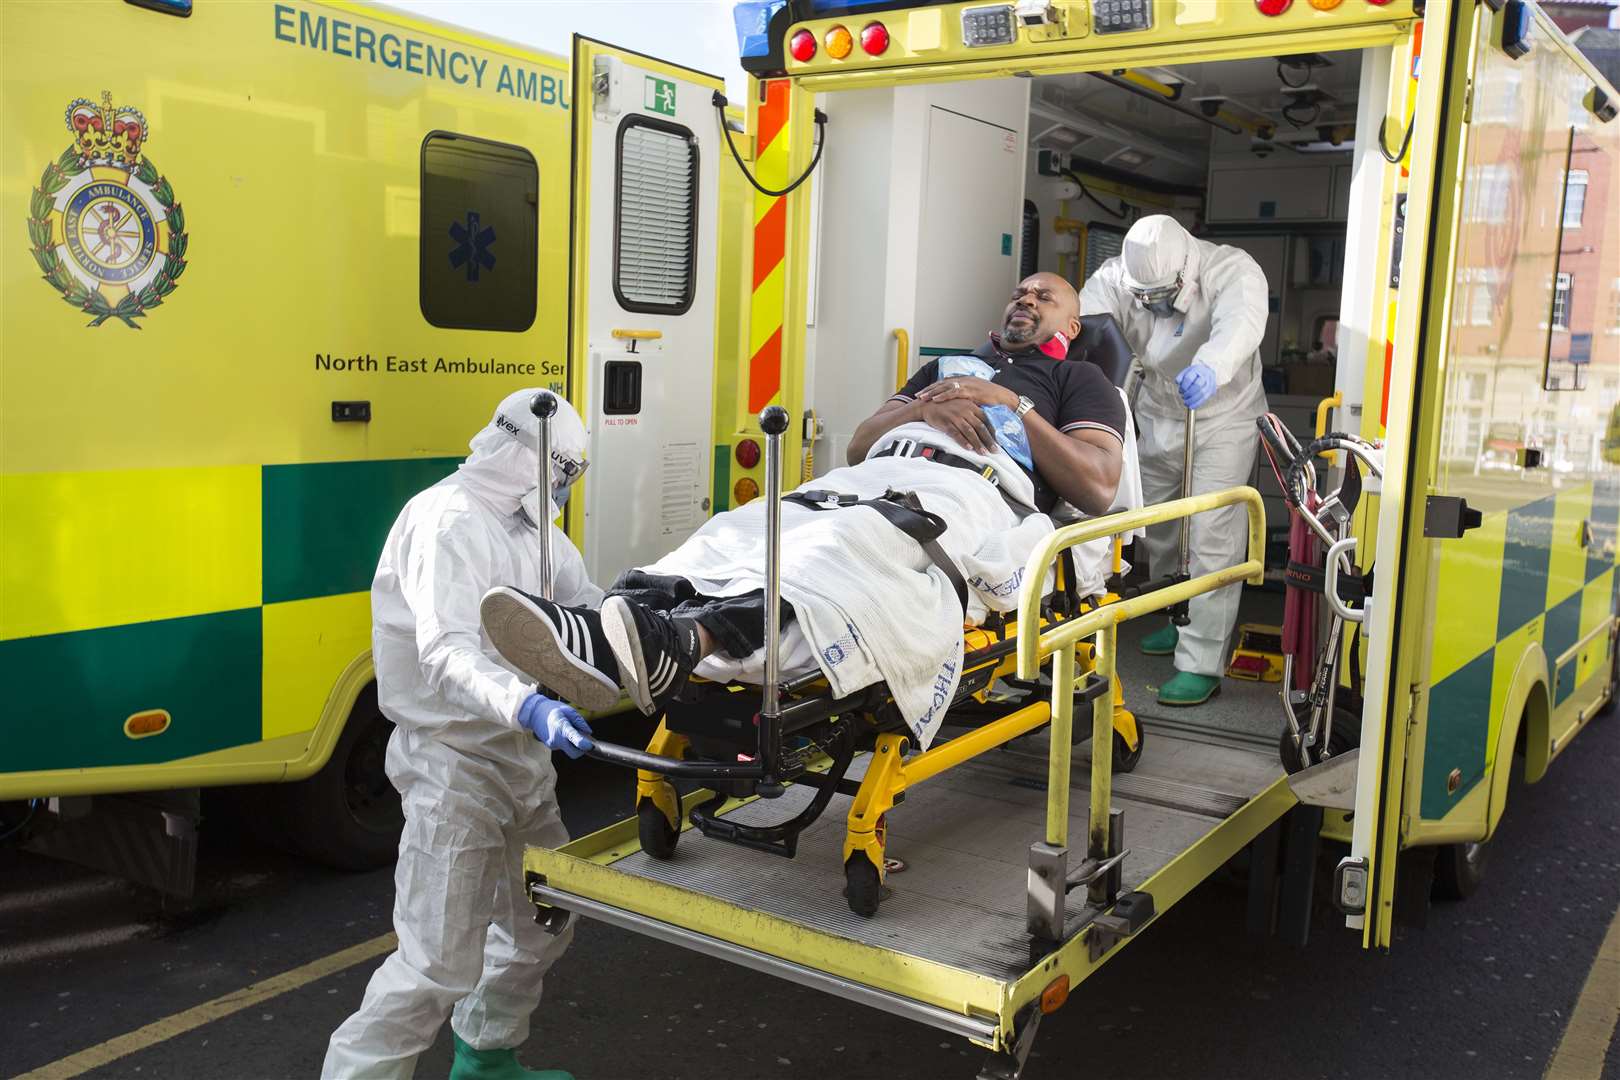 In 2014 NHS staff up and down the country rehearsed their response to Ebola, including these paramedics from the North West Ambulance Service